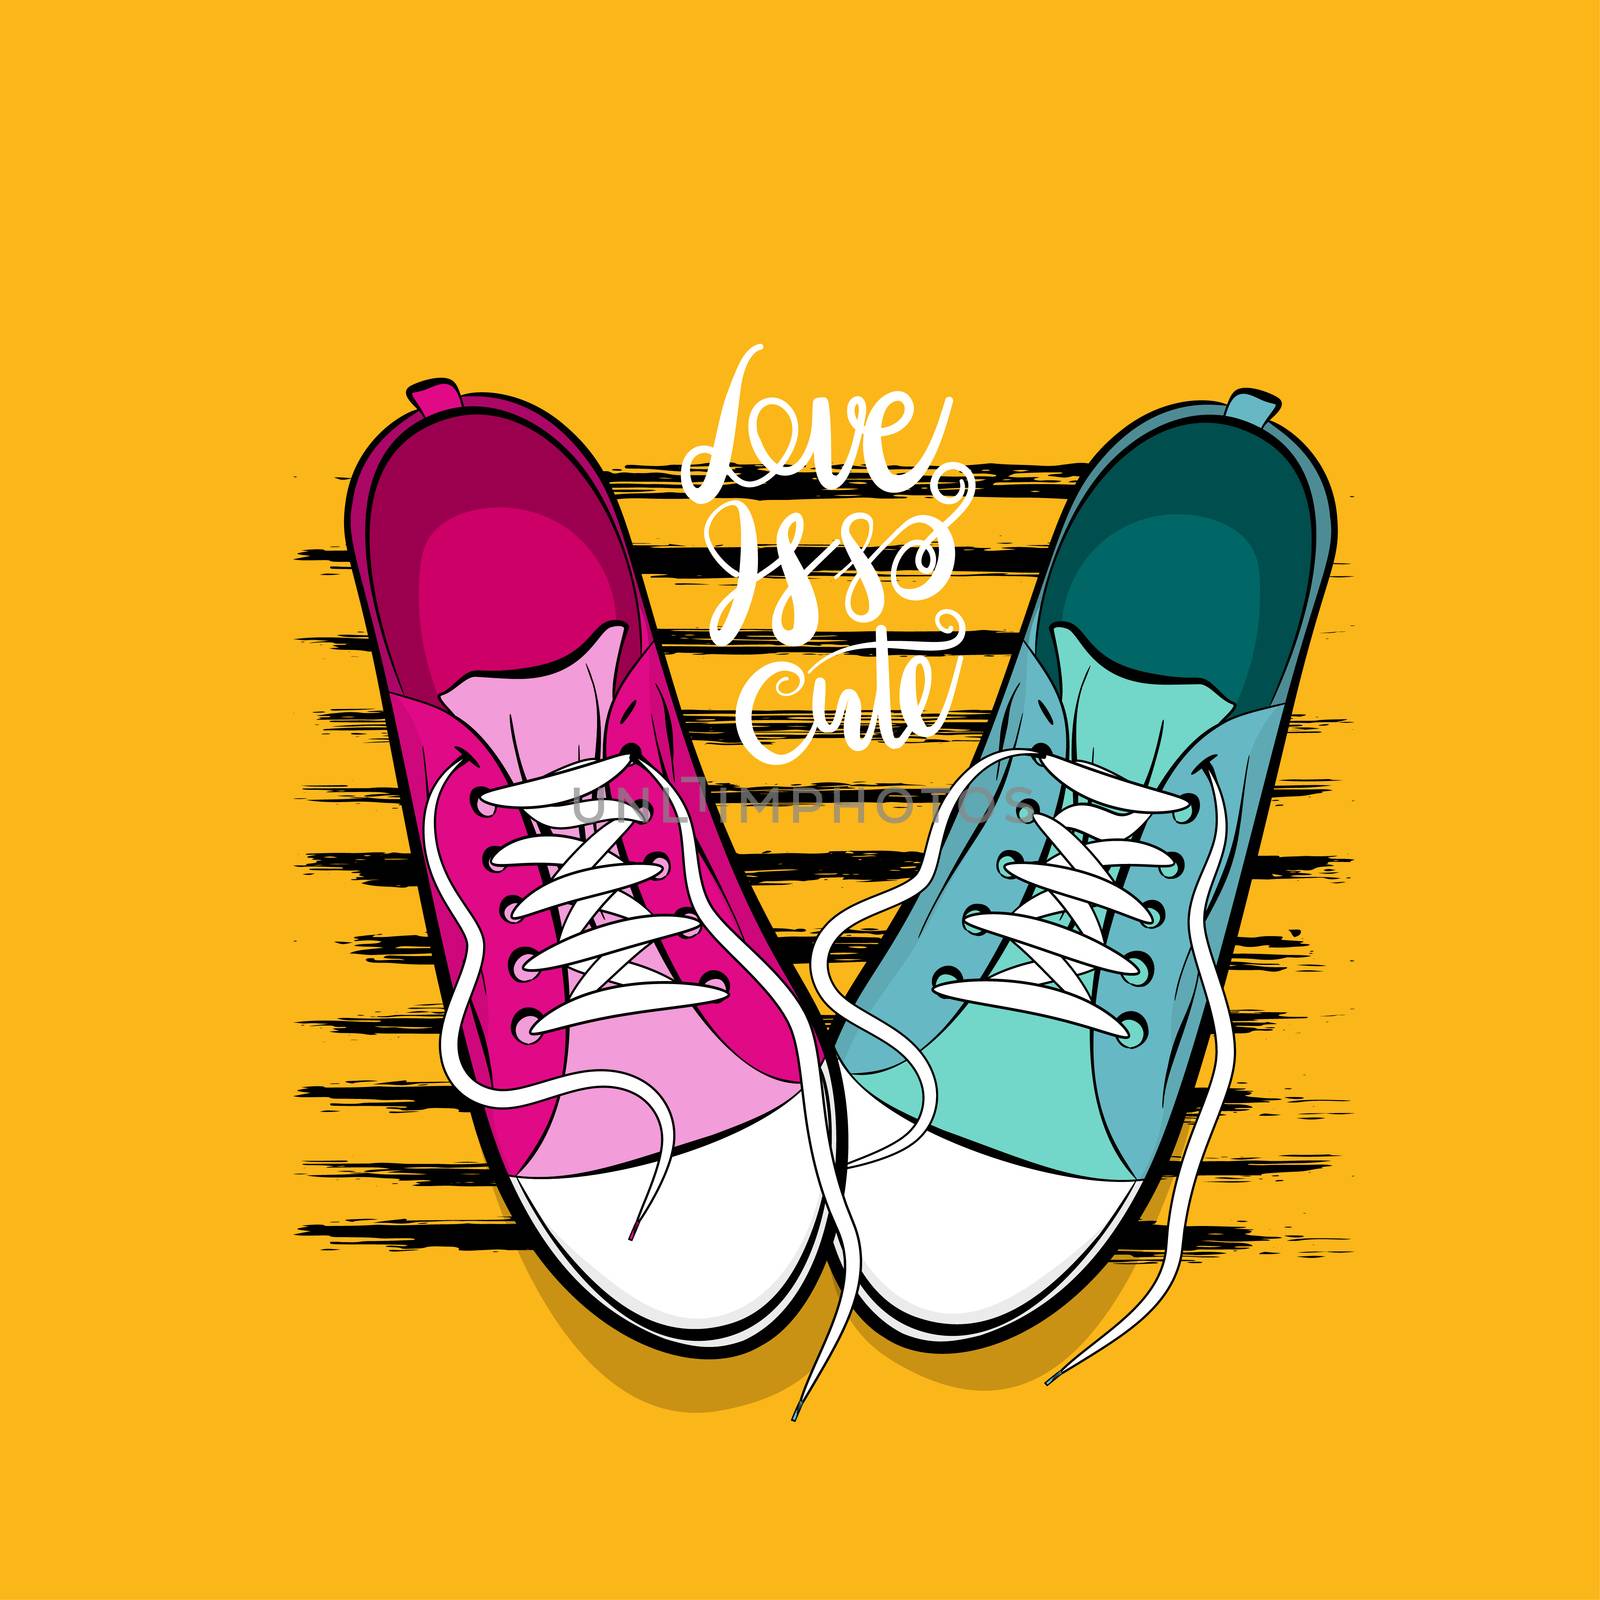 Love is cute. Romantic Valentines poster. Youth young trendy fashion. Pop art drawing sneakers shoes. Kitsch colored comic text background. Pair sporty shoes.